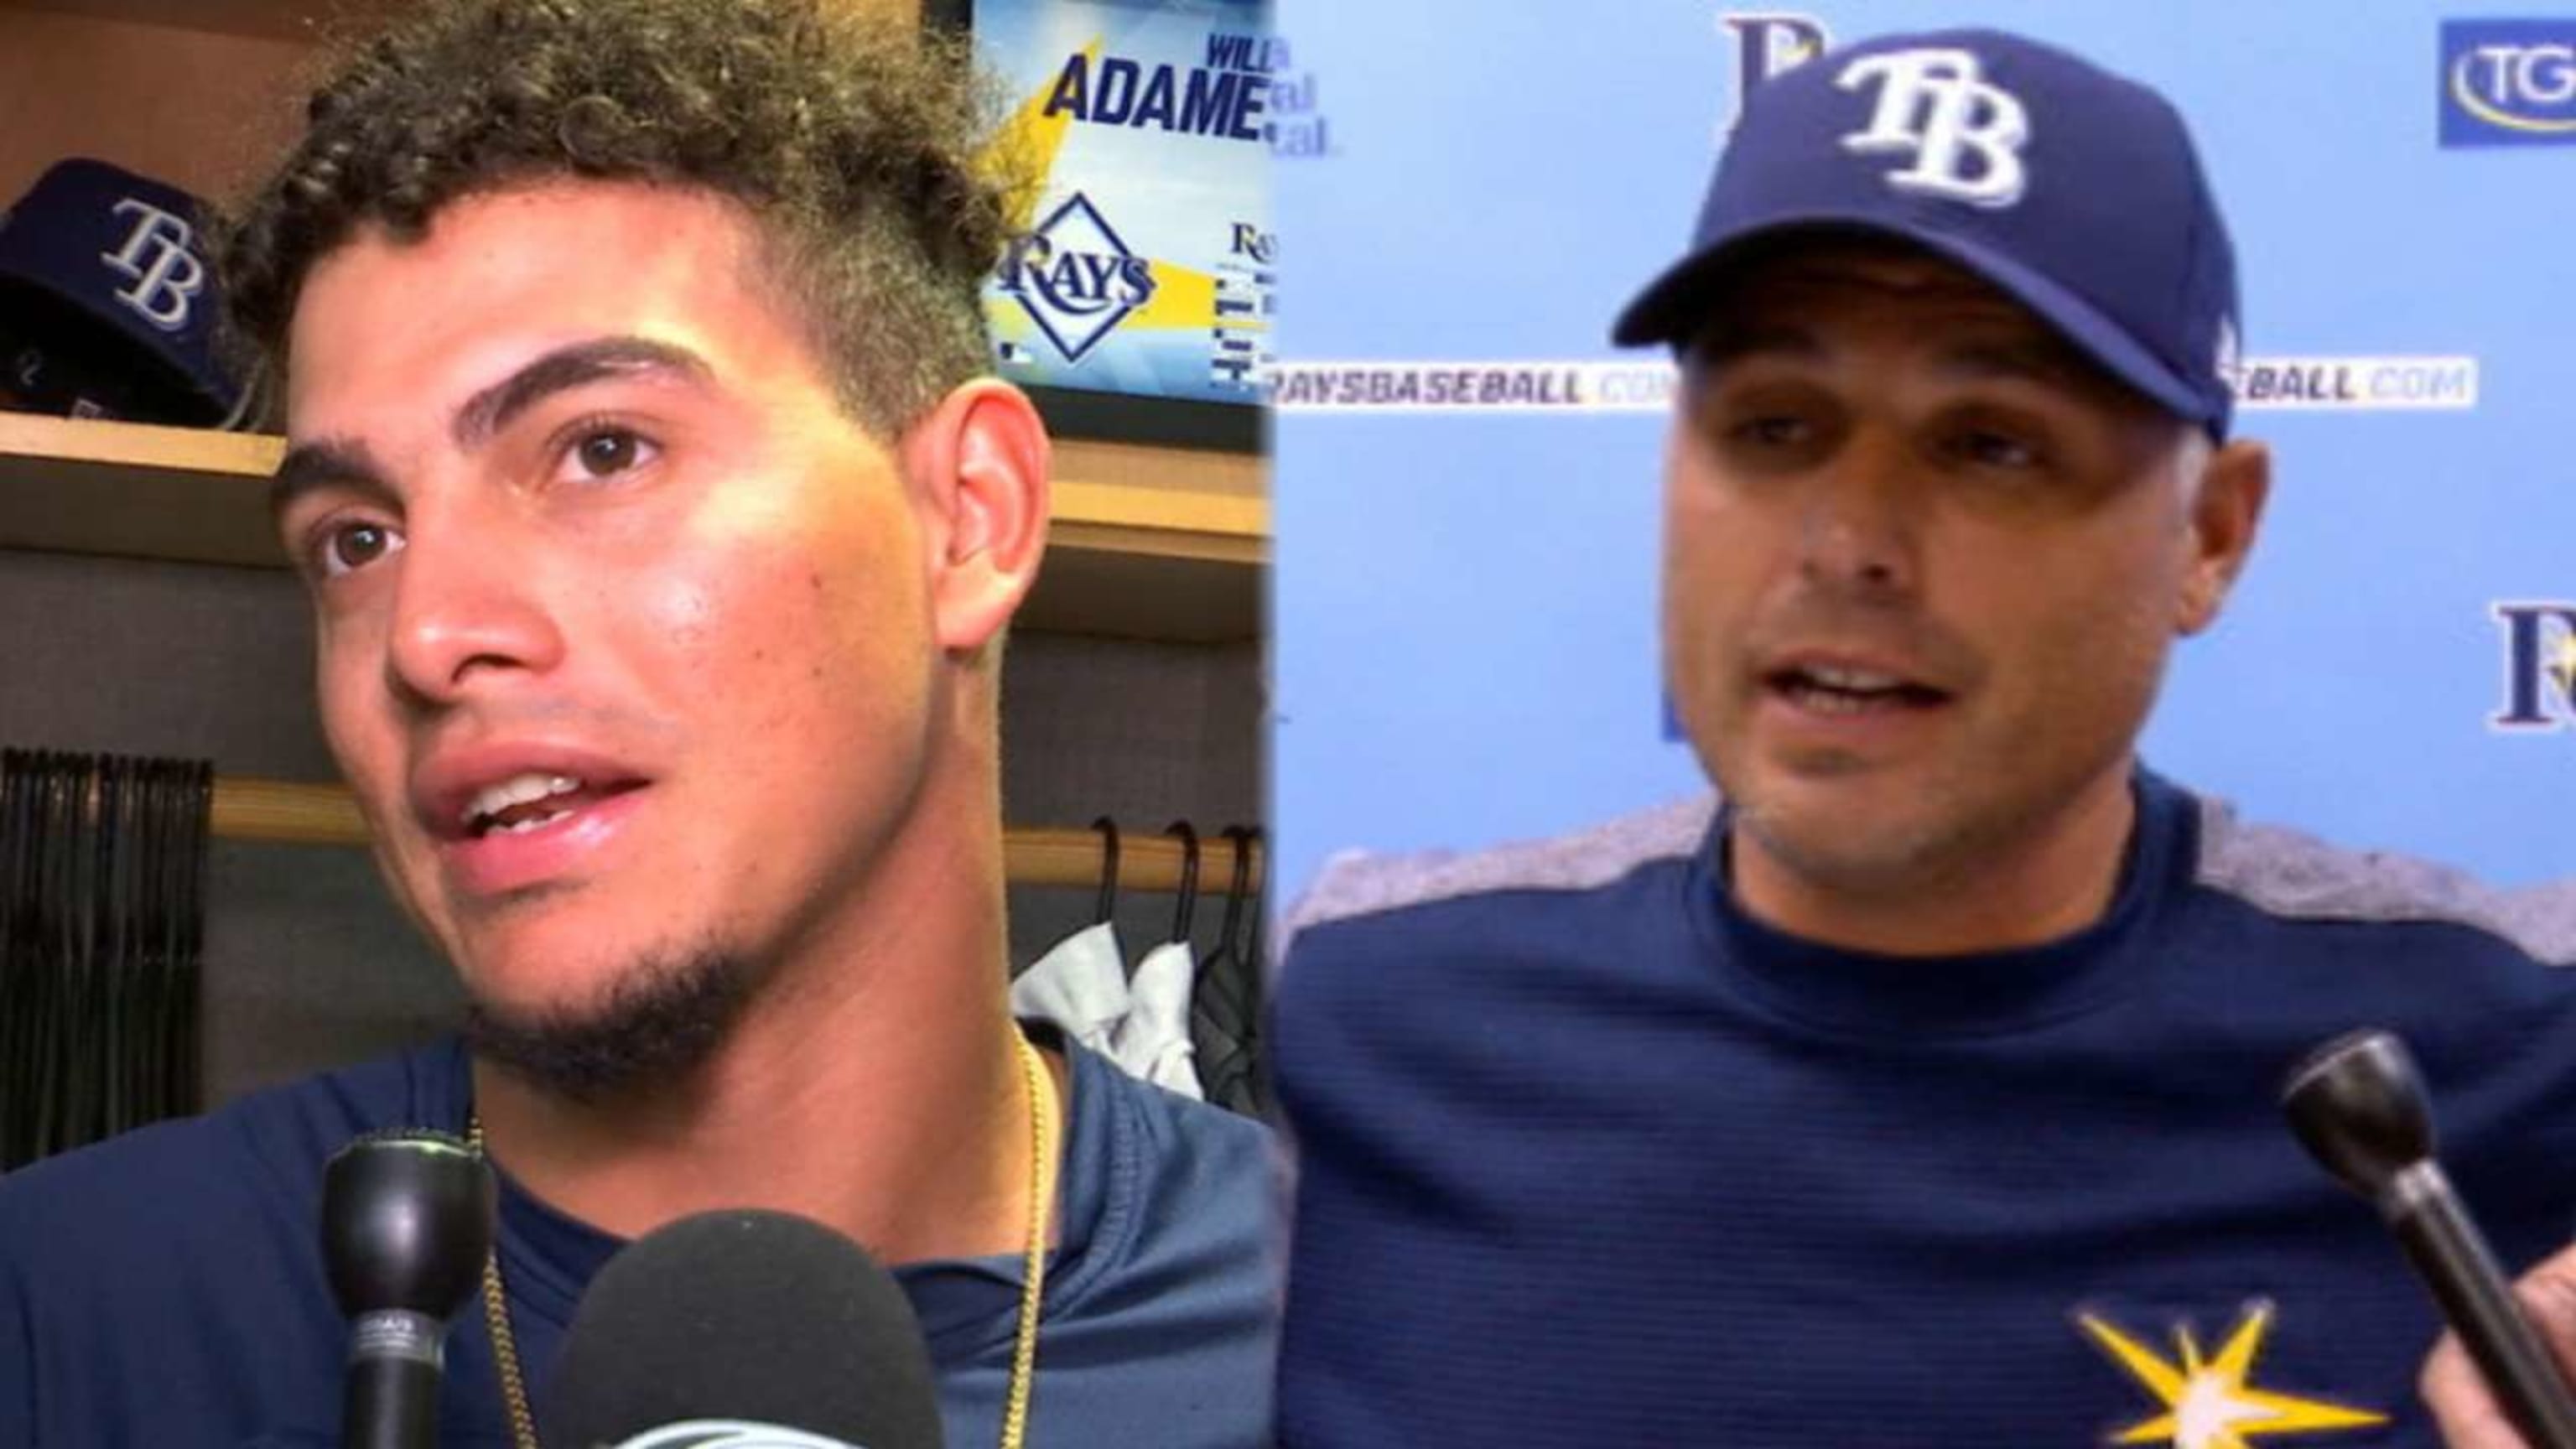 Tampa Bay Rays' Willy Adames heading to Major Leagues for debut